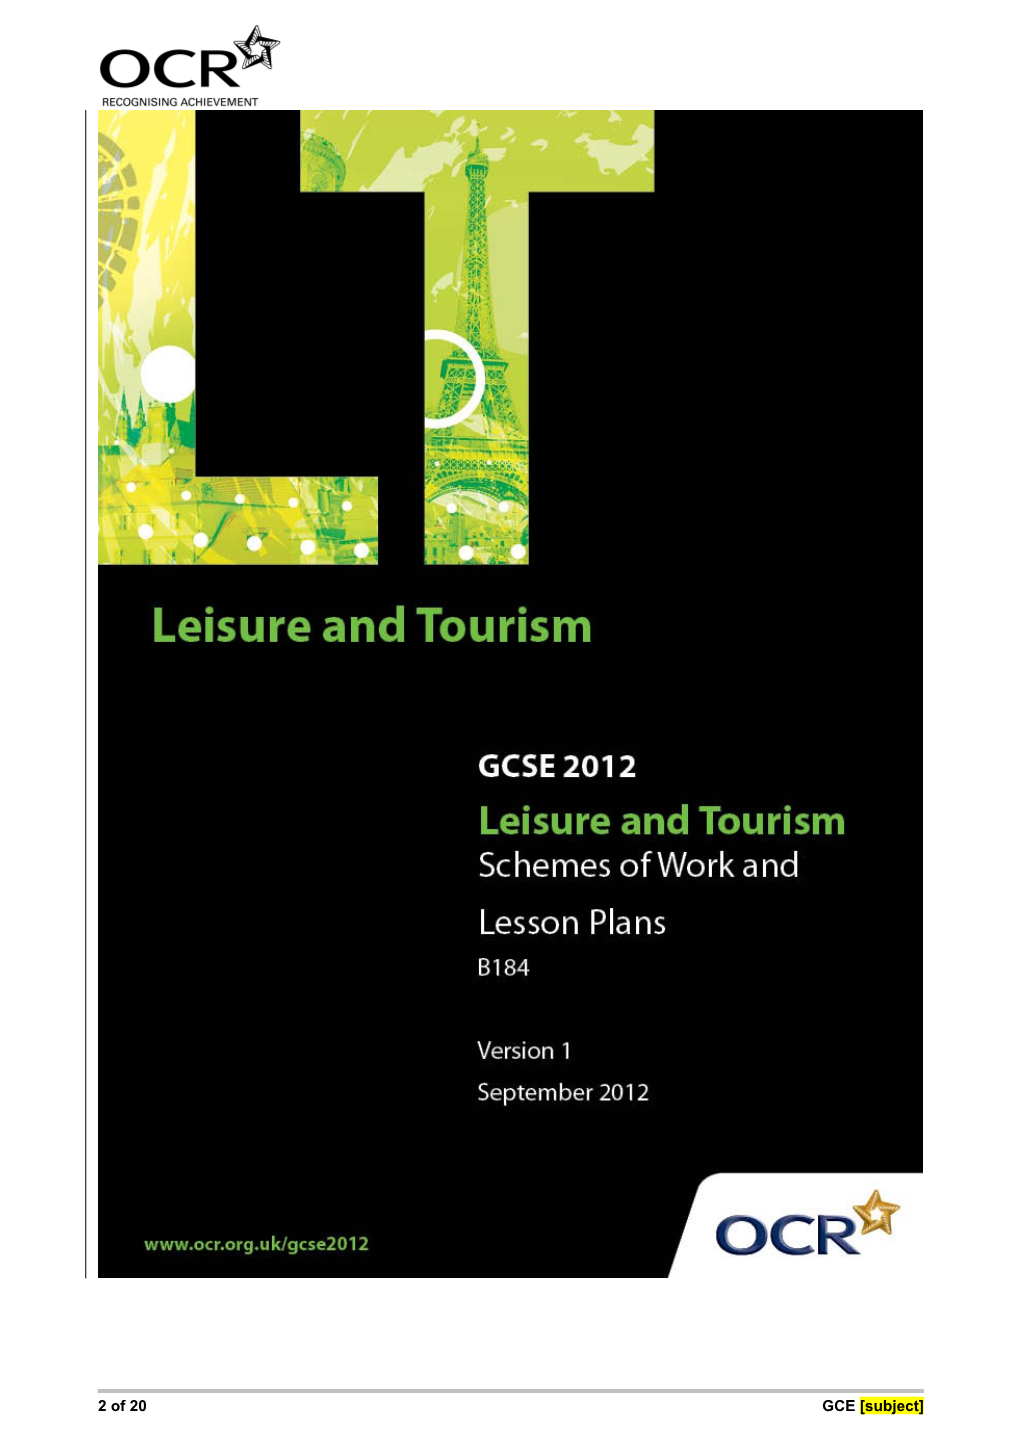 GCSE Leisure and Tourism (Linear 2012) 1 of 18